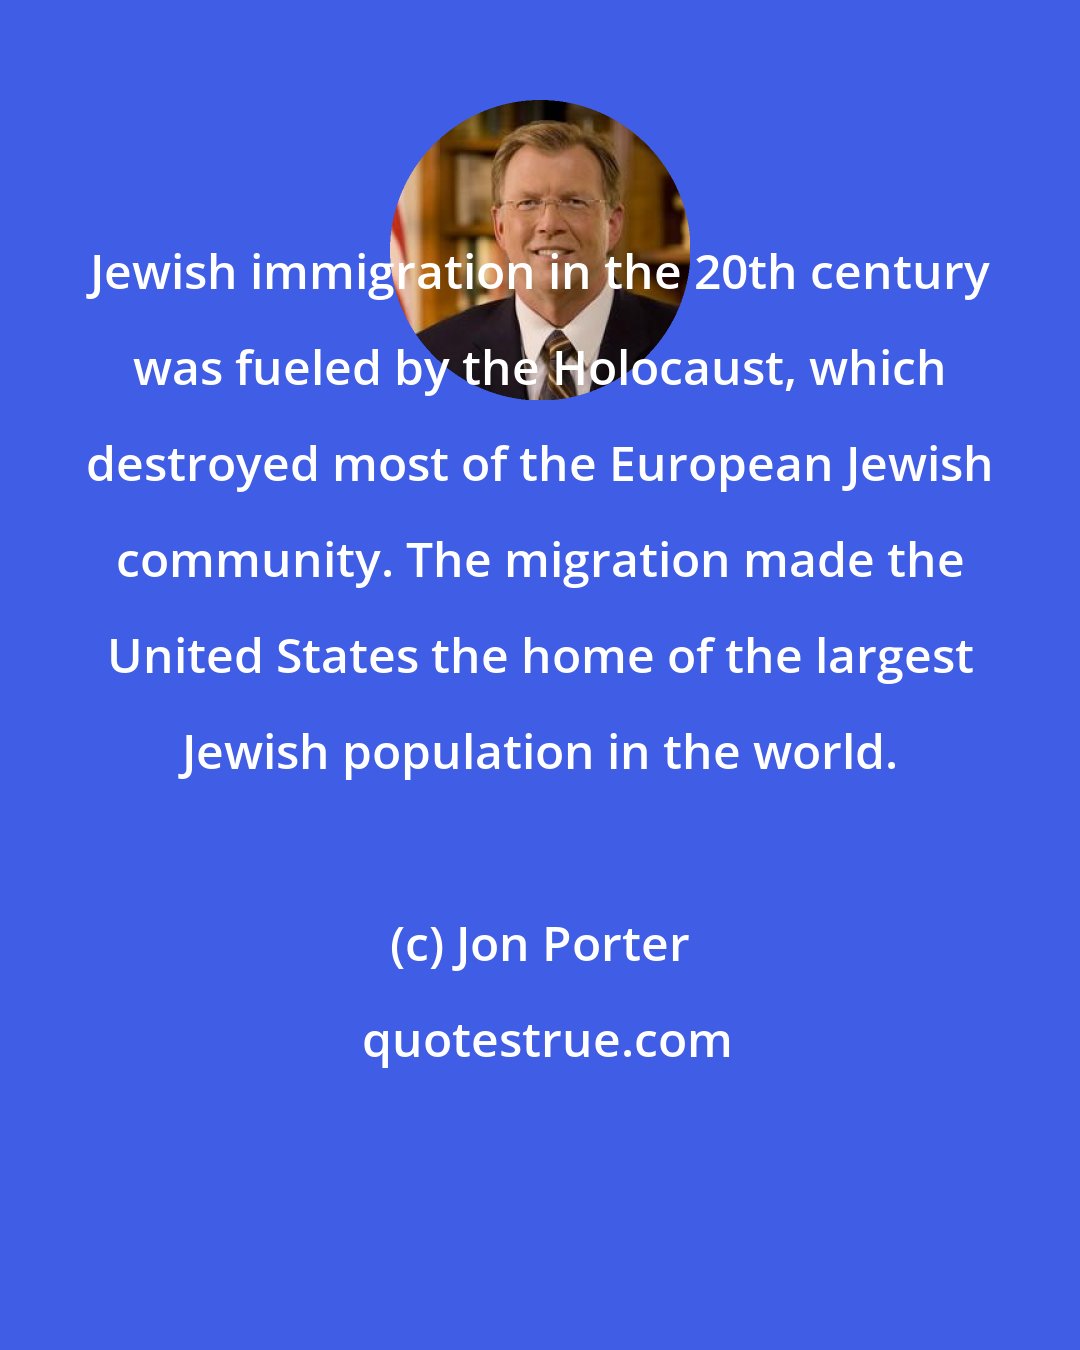 Jon Porter: Jewish immigration in the 20th century was fueled by the Holocaust, which destroyed most of the European Jewish community. The migration made the United States the home of the largest Jewish population in the world.